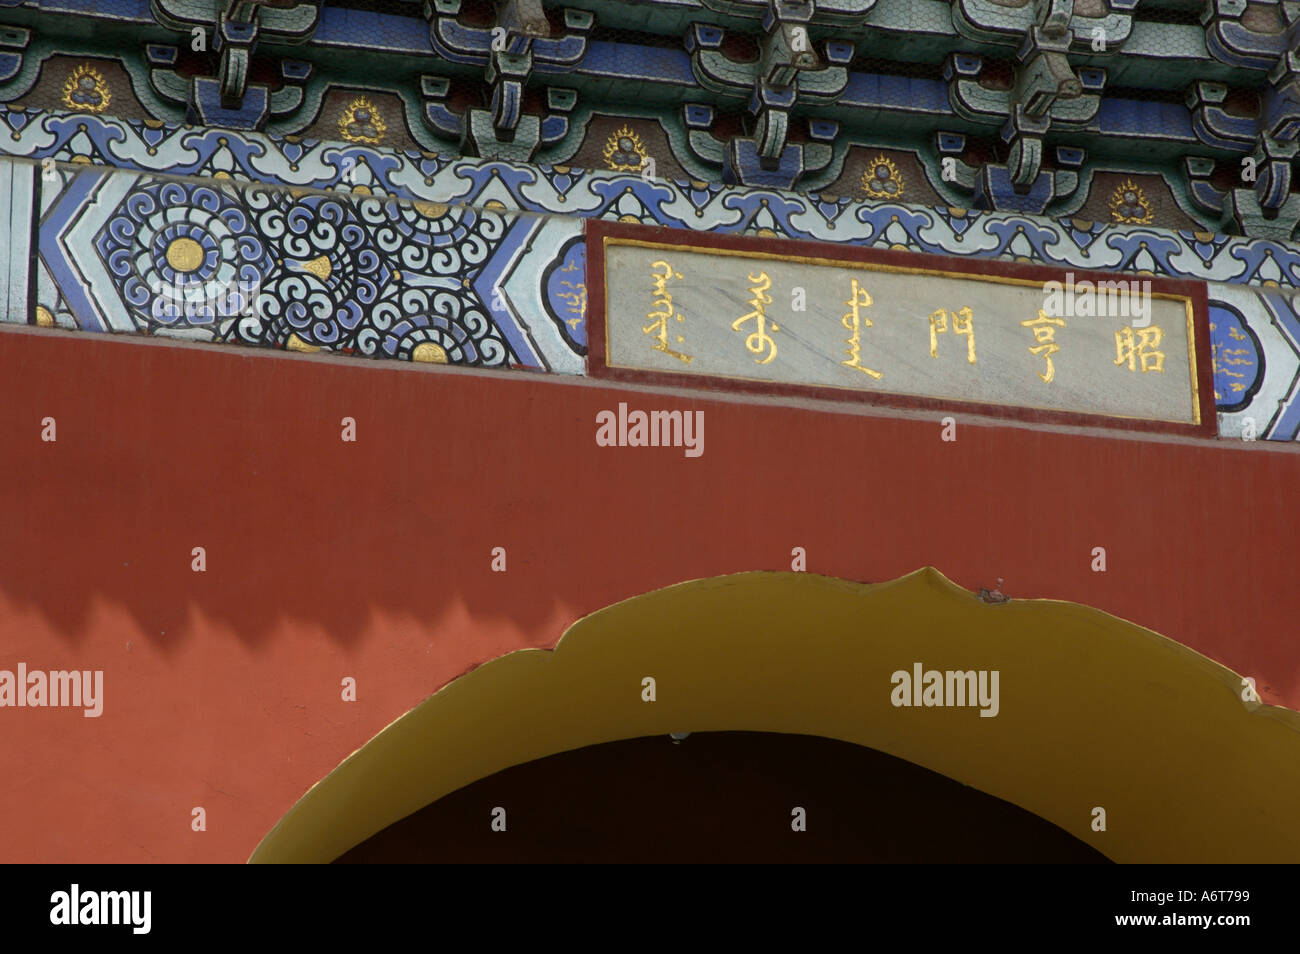 China Beijing The Temple Of Heaven Painting Details Of A Gate At Tiantan Park With Ideograms Writing Stock Photo